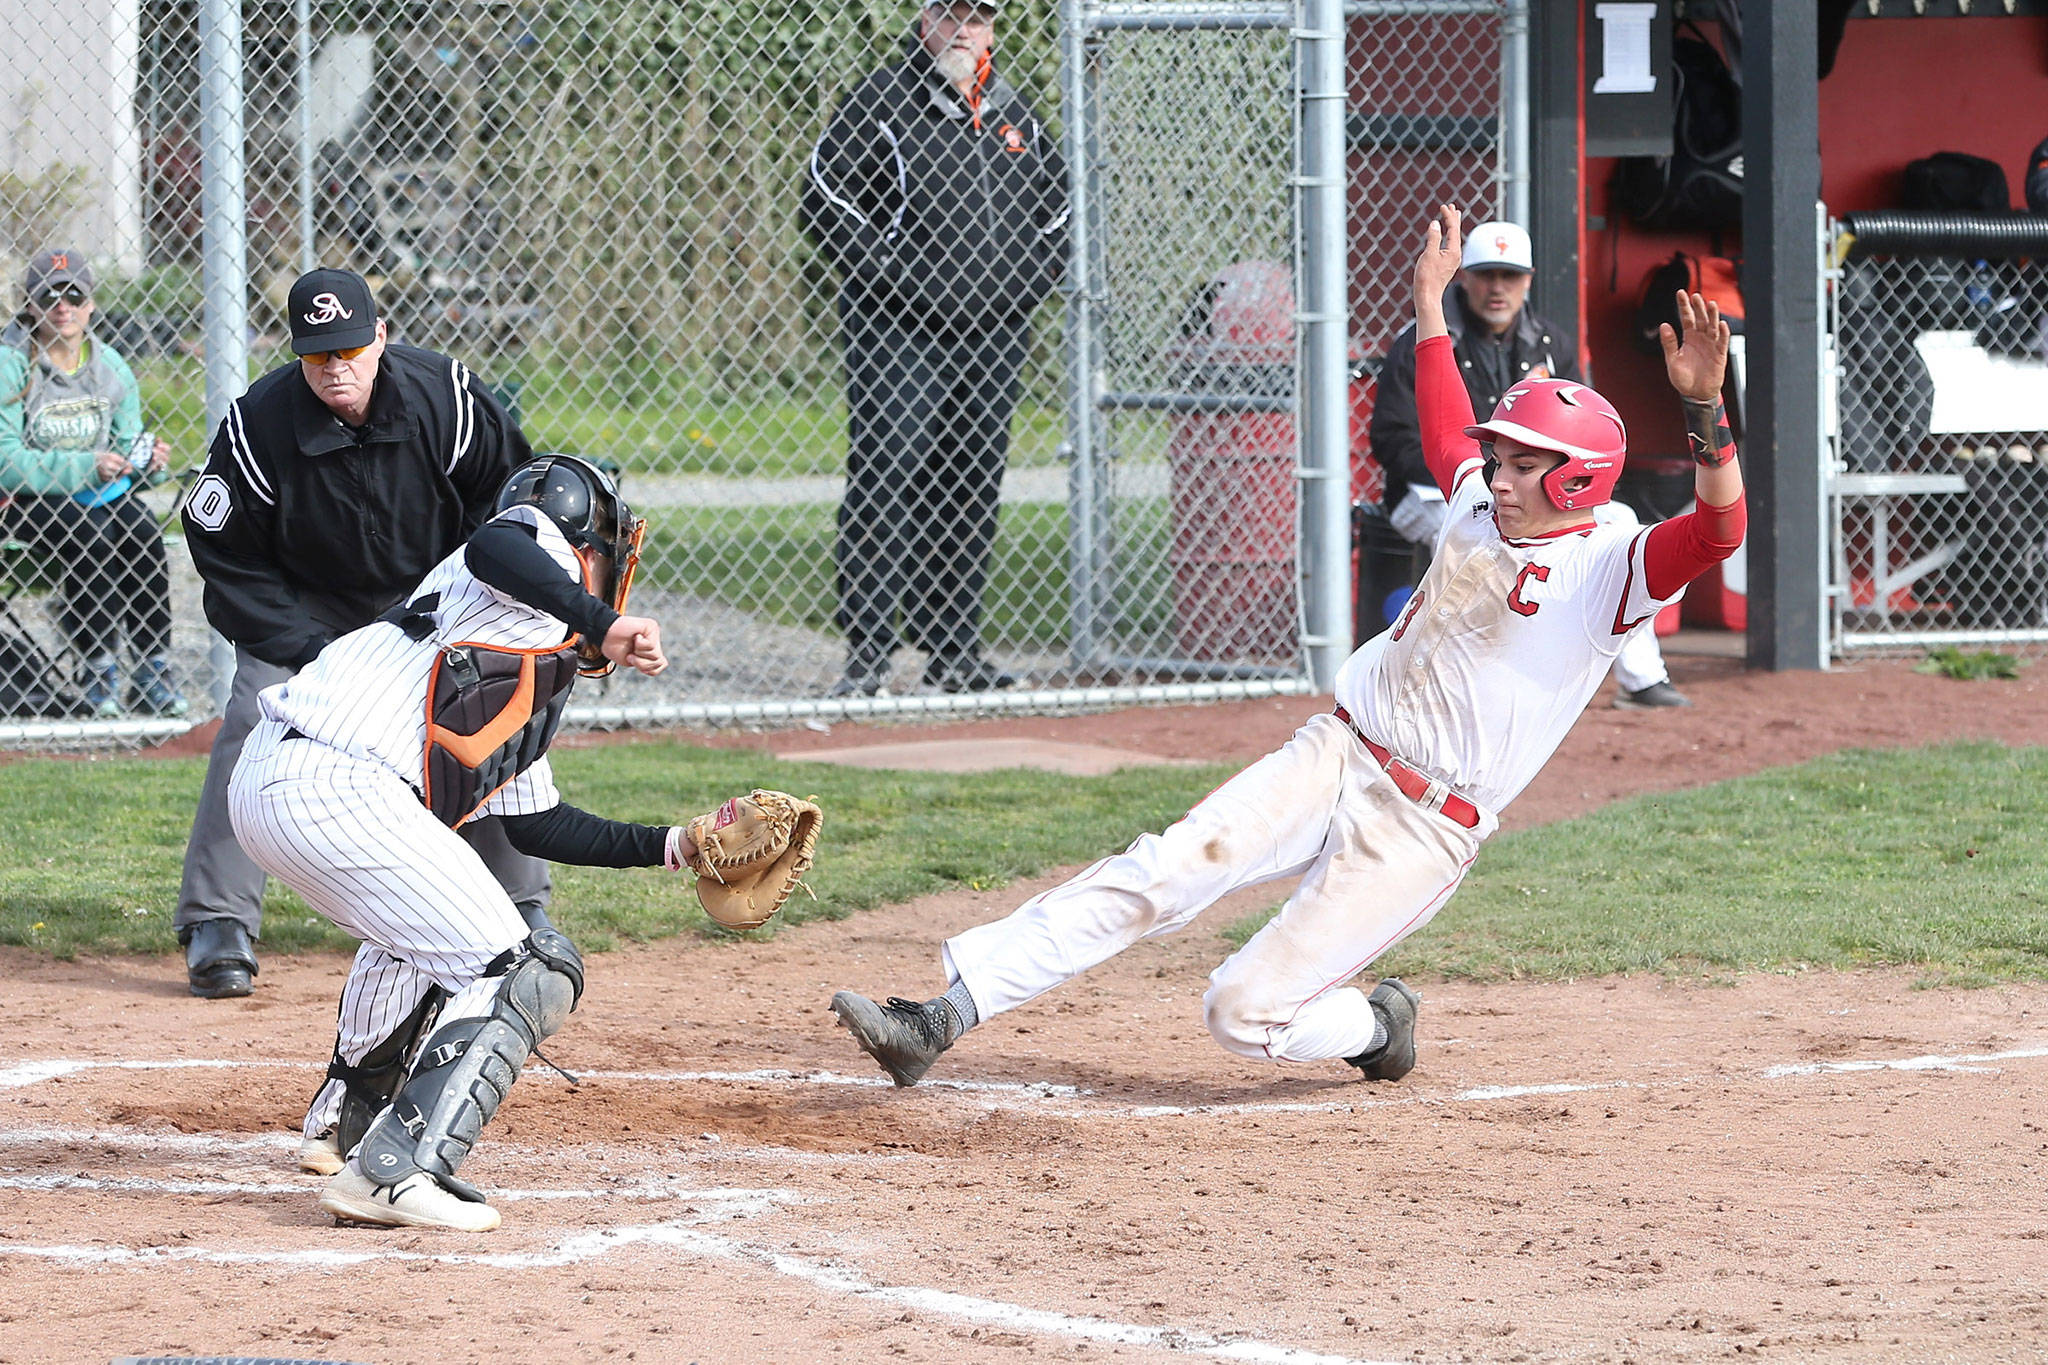 Coupeville’s Jake Pease sides under the tag of Granite Falls’ Cameron Tappe to score a first-inning run for the Wolves.(Photo by John Fisken)